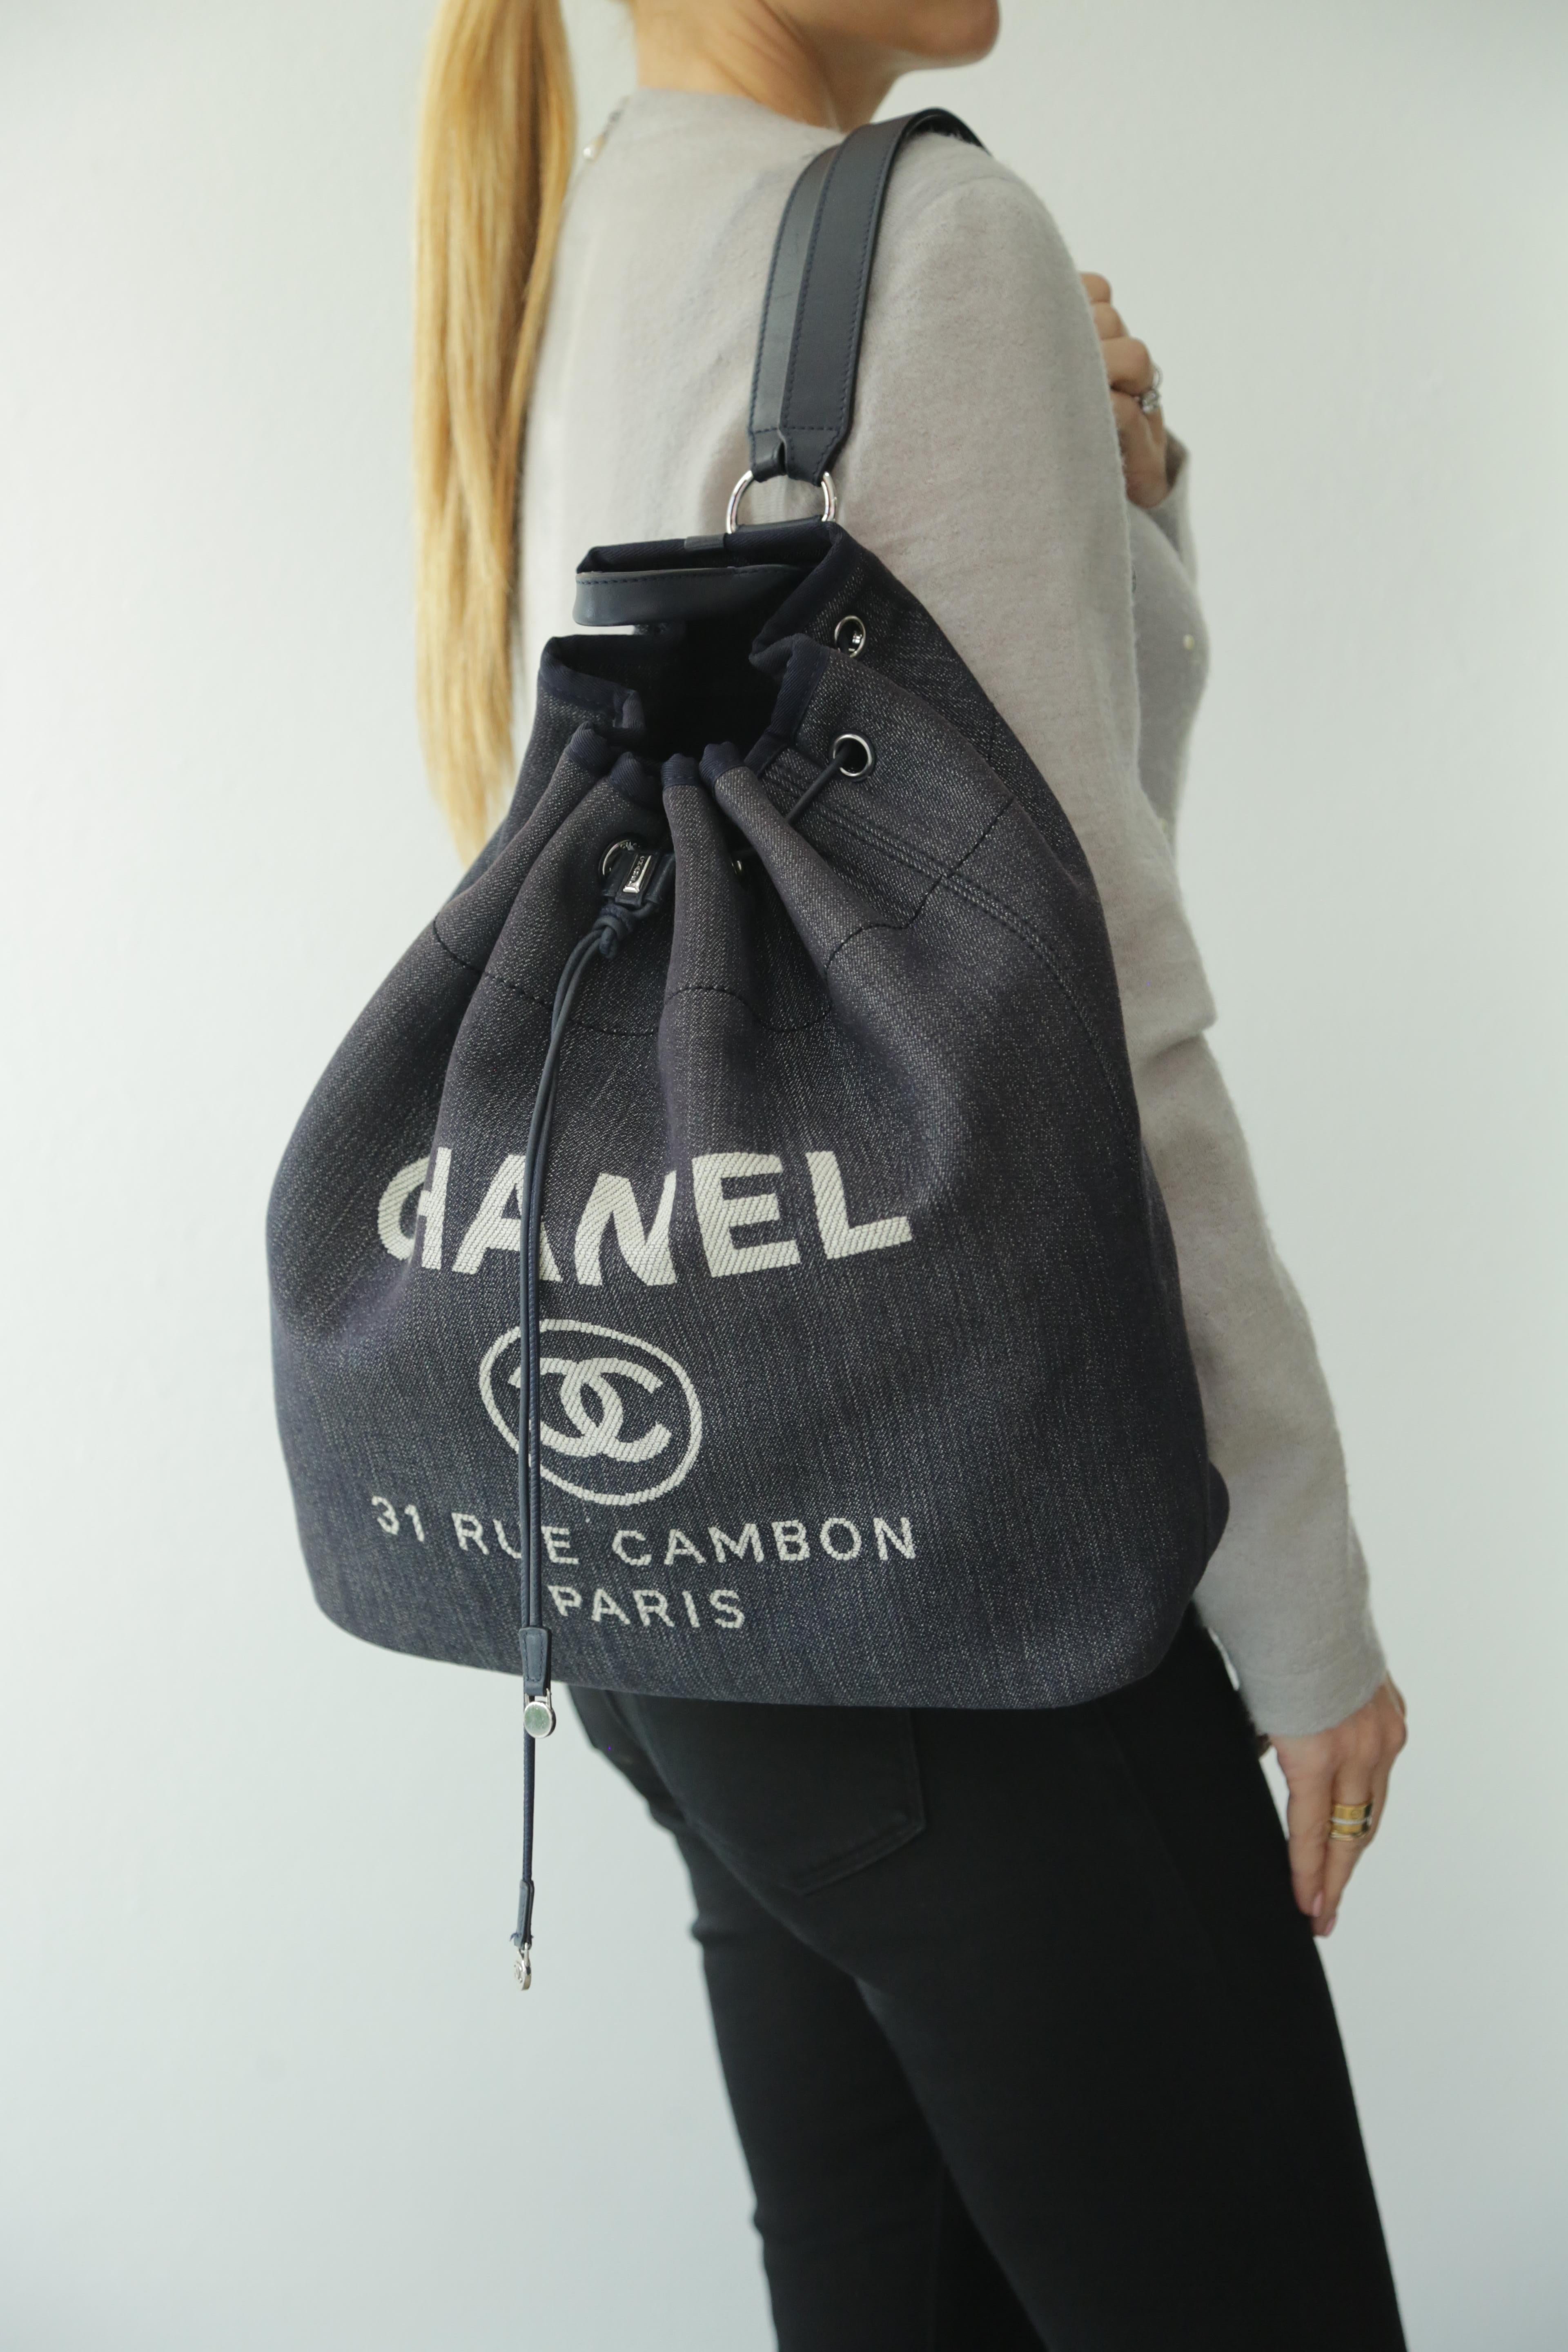 chanel canvas backpack